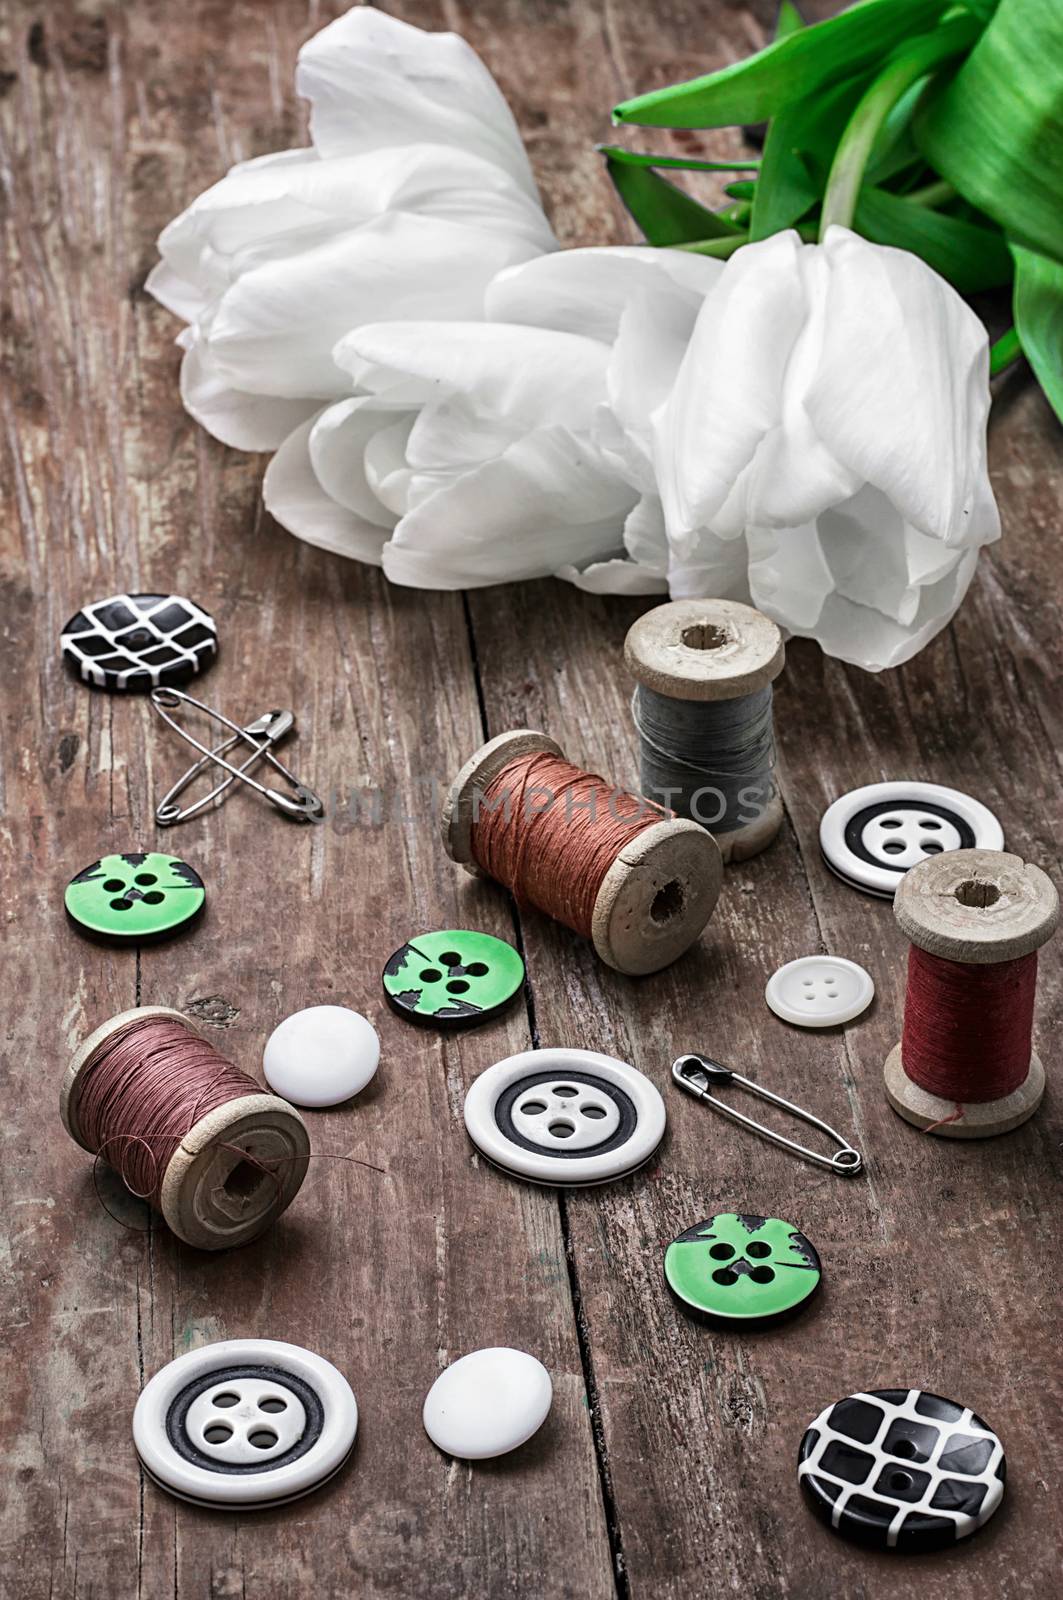 set of sewing accessories from threads and buttons on the background of white tulips